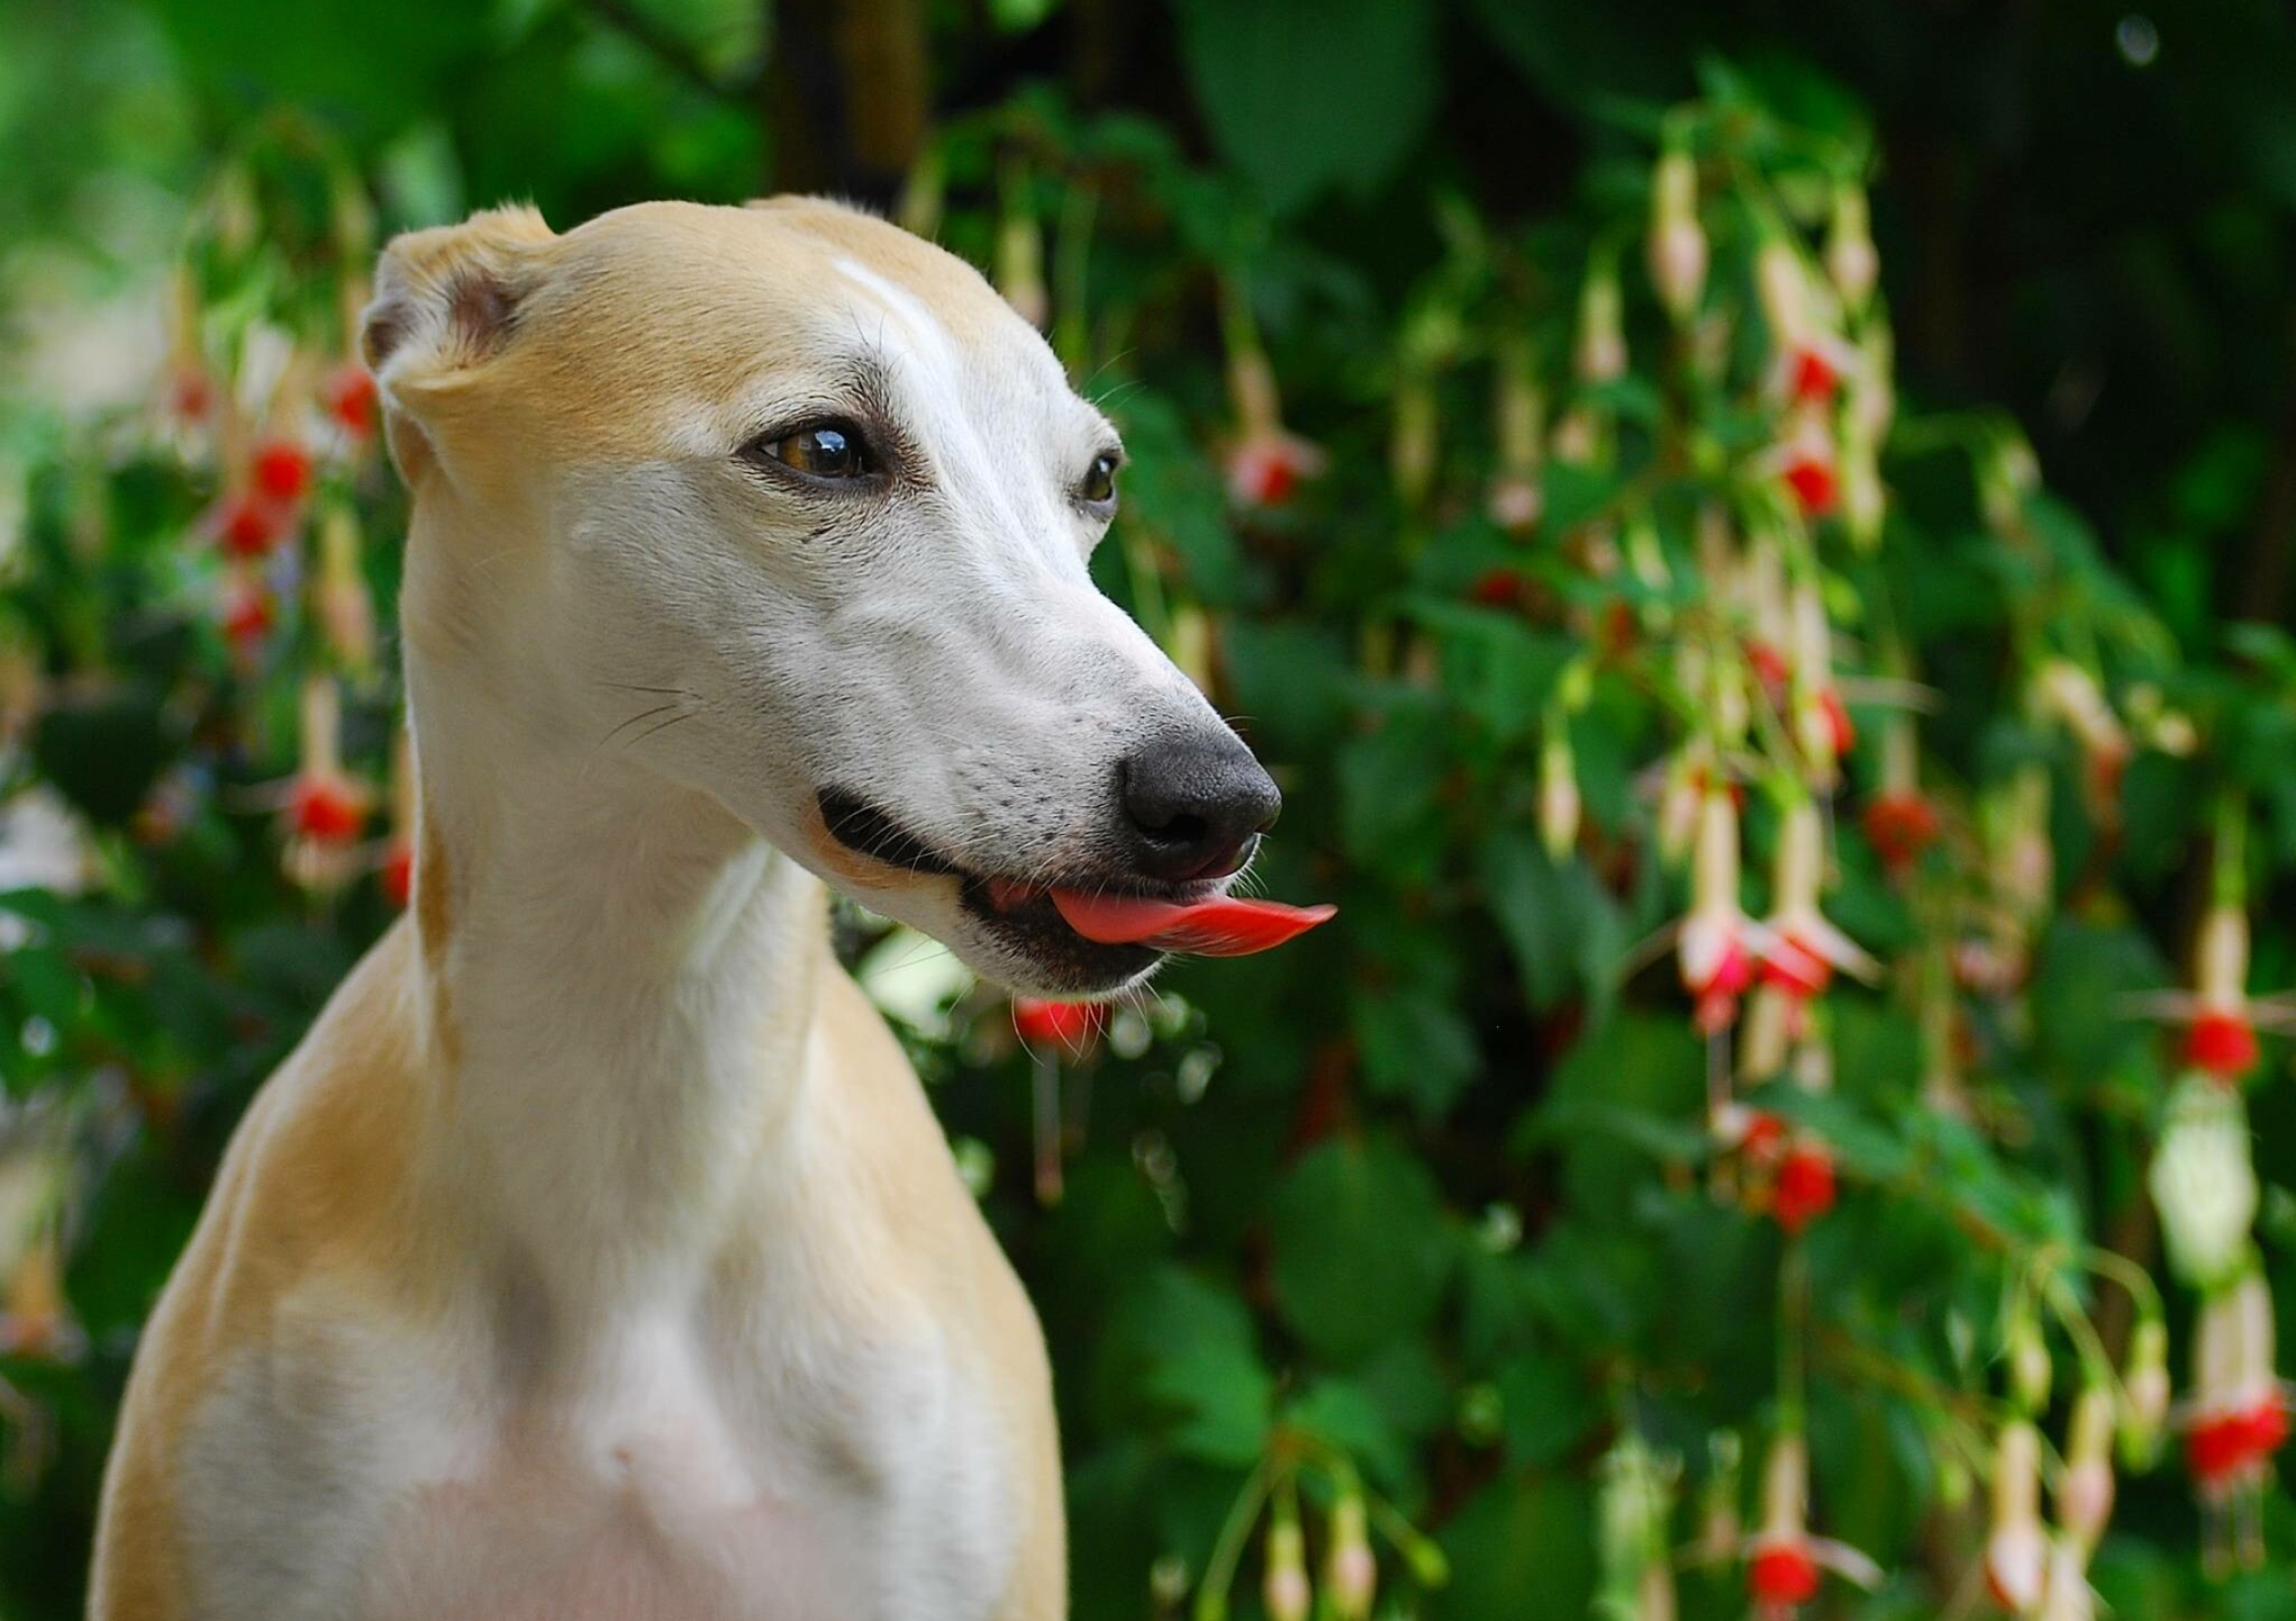 Whippet Dog: Whippets were bred to hunt by sight, coursing game in open areas at high speeds. 2540x1790 HD Wallpaper.